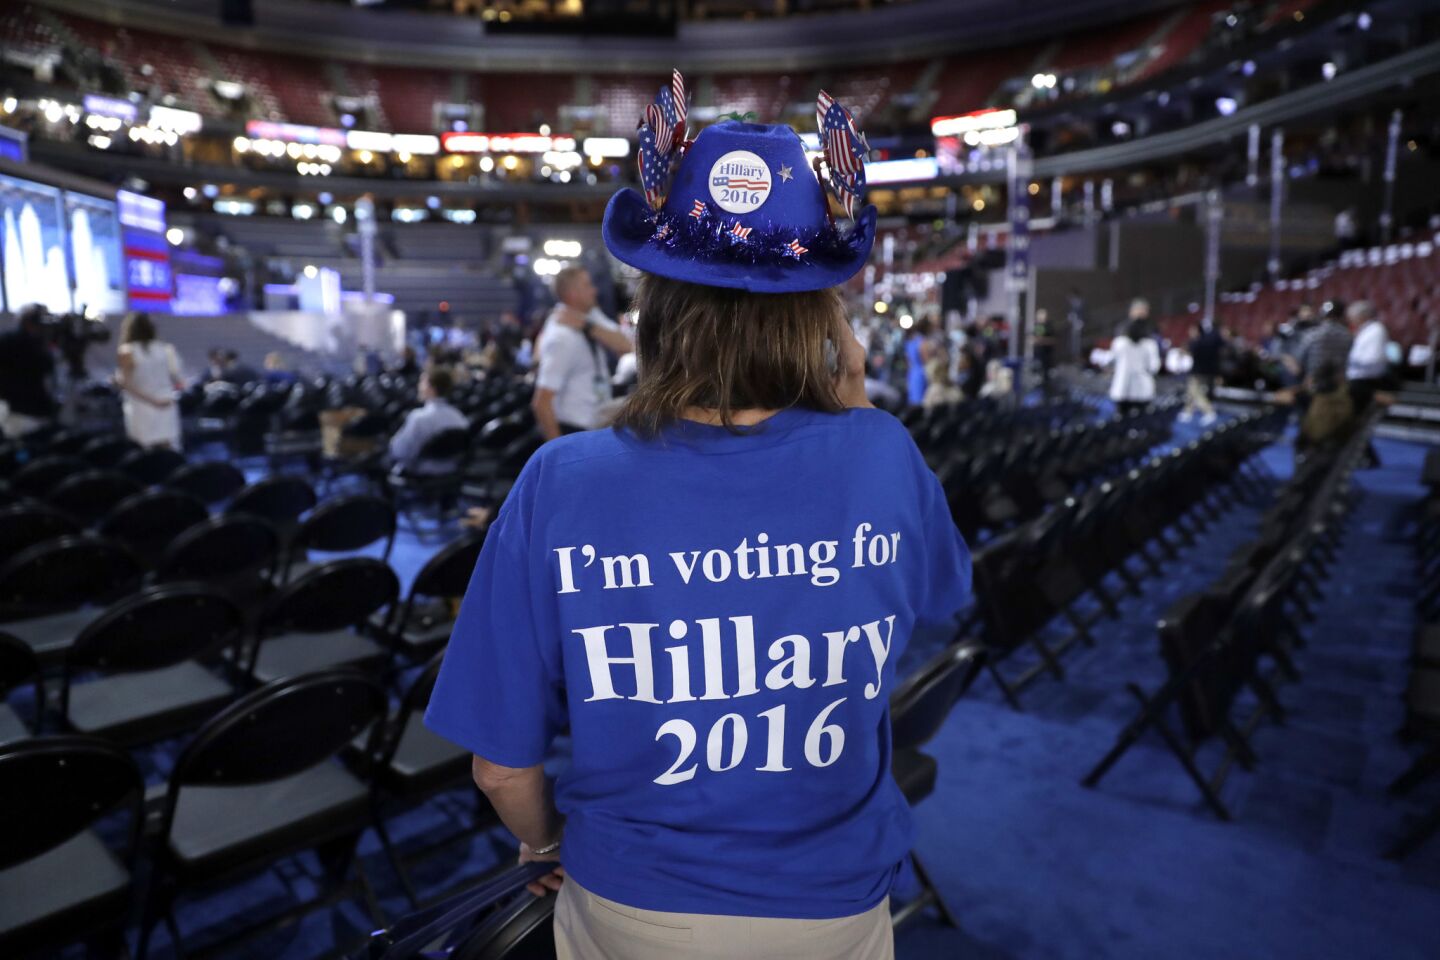 Florida delegate Dianne Krumel from Pensacola shows her support for Democratic Presidential candidate Hillary Clinton before the start of the third day of the Democratic National Convention in Philadelphia.